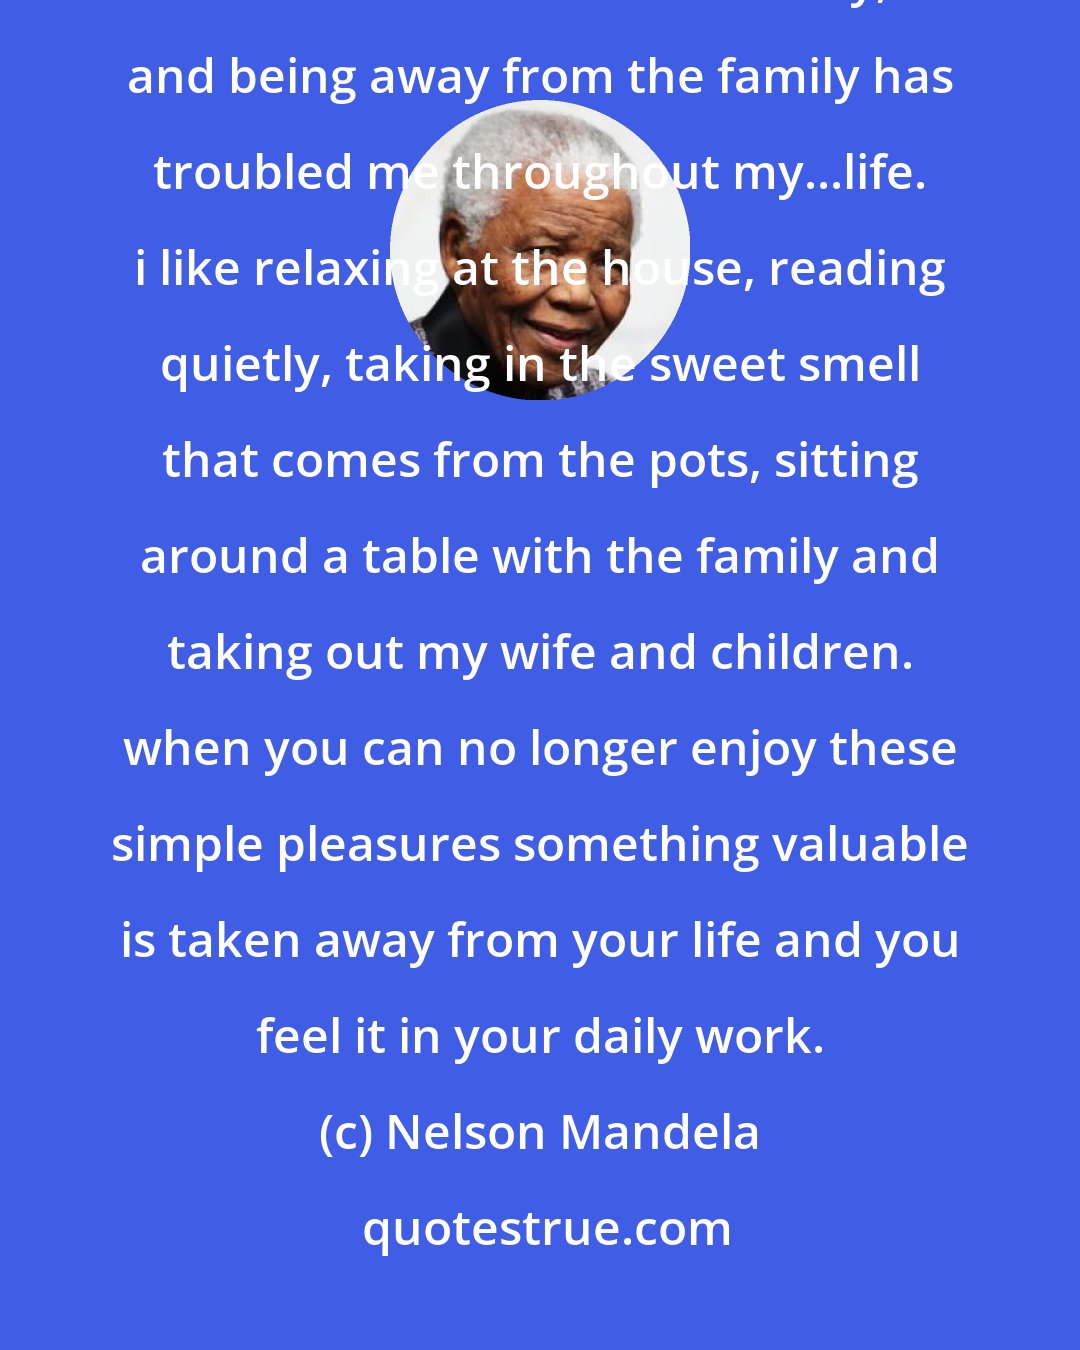 Nelson Mandela: i love playing and chatting with children...feeding and putting them to bed with a little story, and being away from the family has troubled me throughout my...life. i like relaxing at the house, reading quietly, taking in the sweet smell that comes from the pots, sitting around a table with the family and taking out my wife and children. when you can no longer enjoy these simple pleasures something valuable is taken away from your life and you feel it in your daily work.